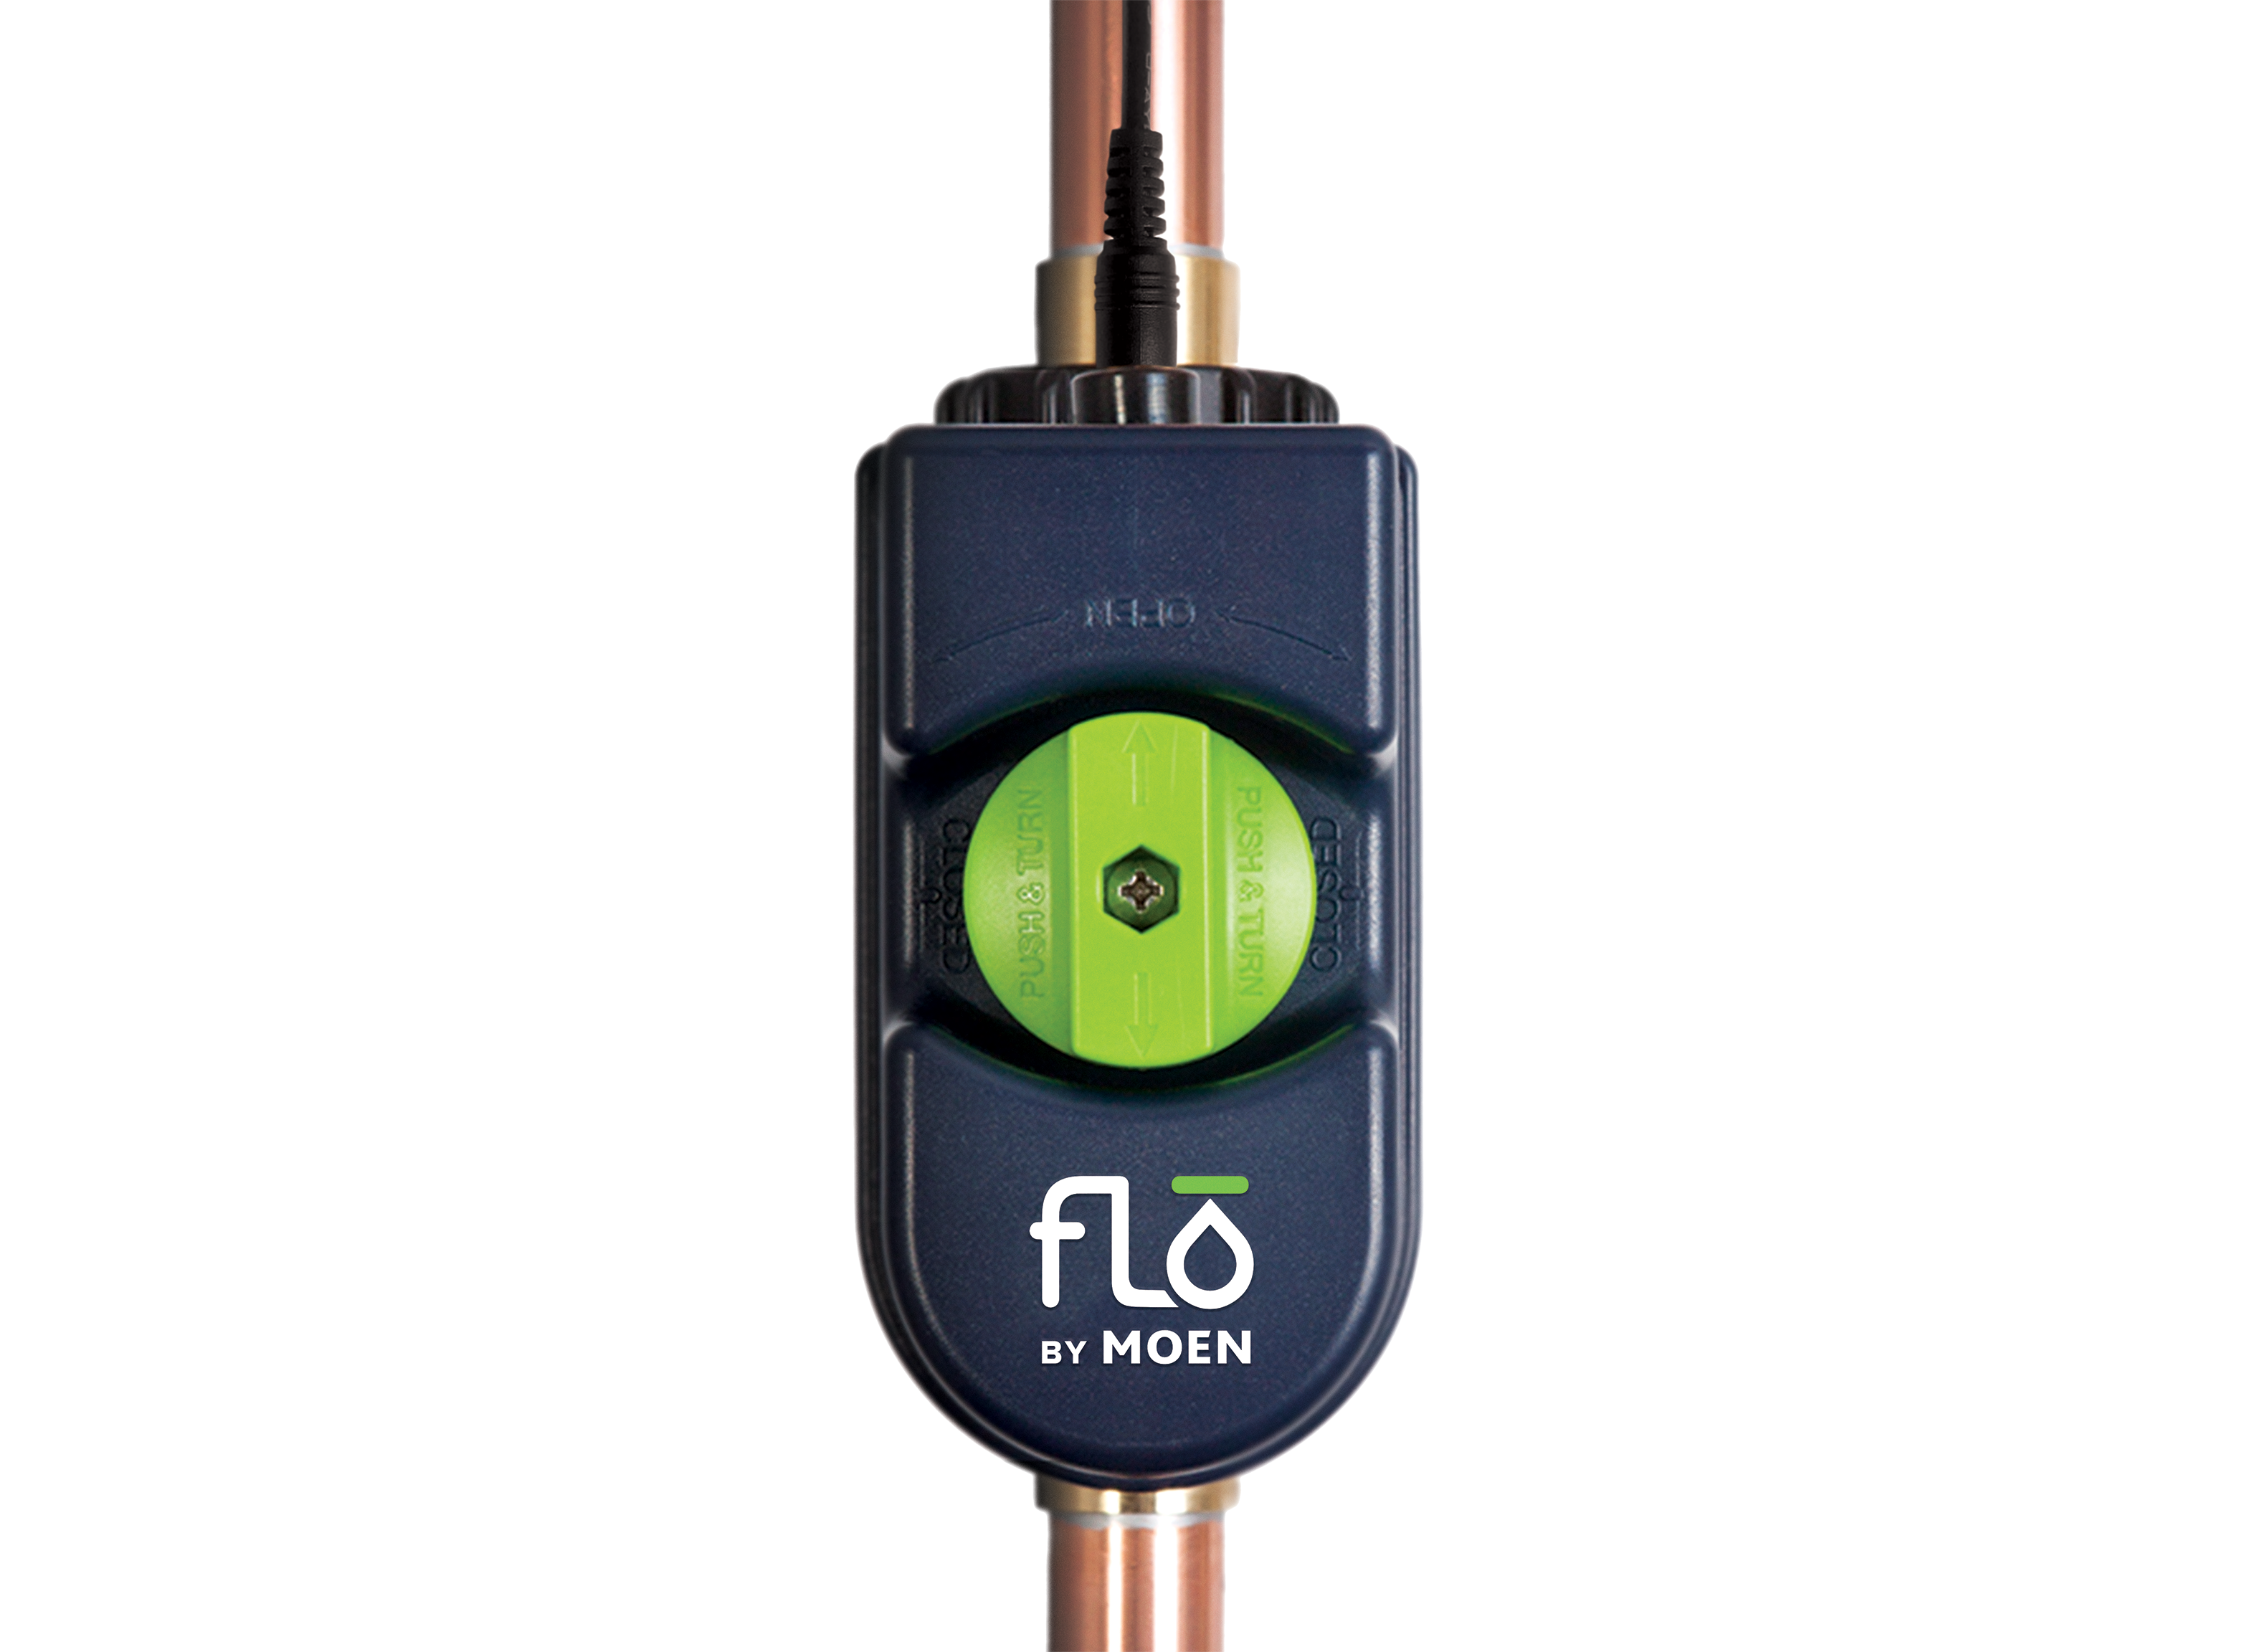 https://crdms.images.consumerreports.org/prod/products/cr/models/401429-water-leak-detector-systems-flo-by-moen-smart-water-shutoff-system-900-001-10013557.png